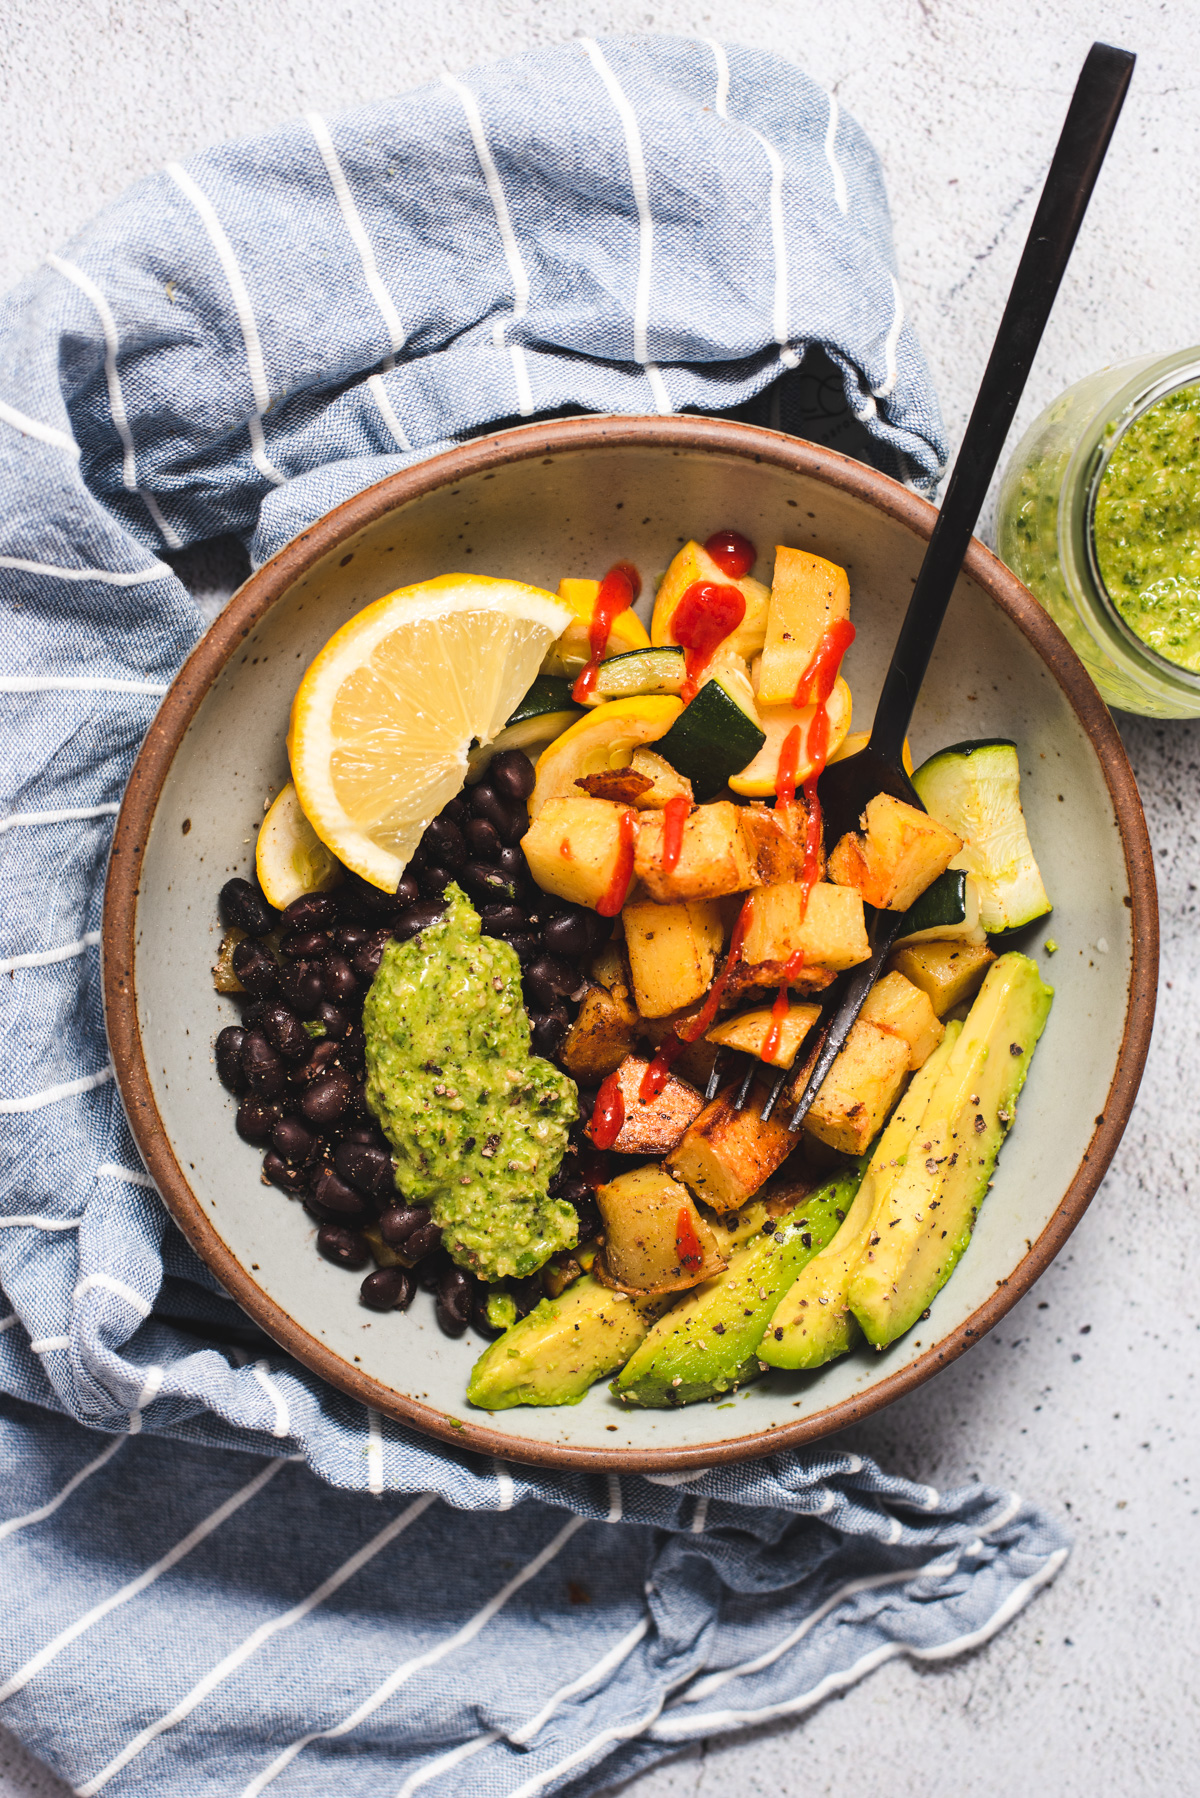 Bowl filled with pesto, avocado, roasted potatoes, black beans and roasted squash.